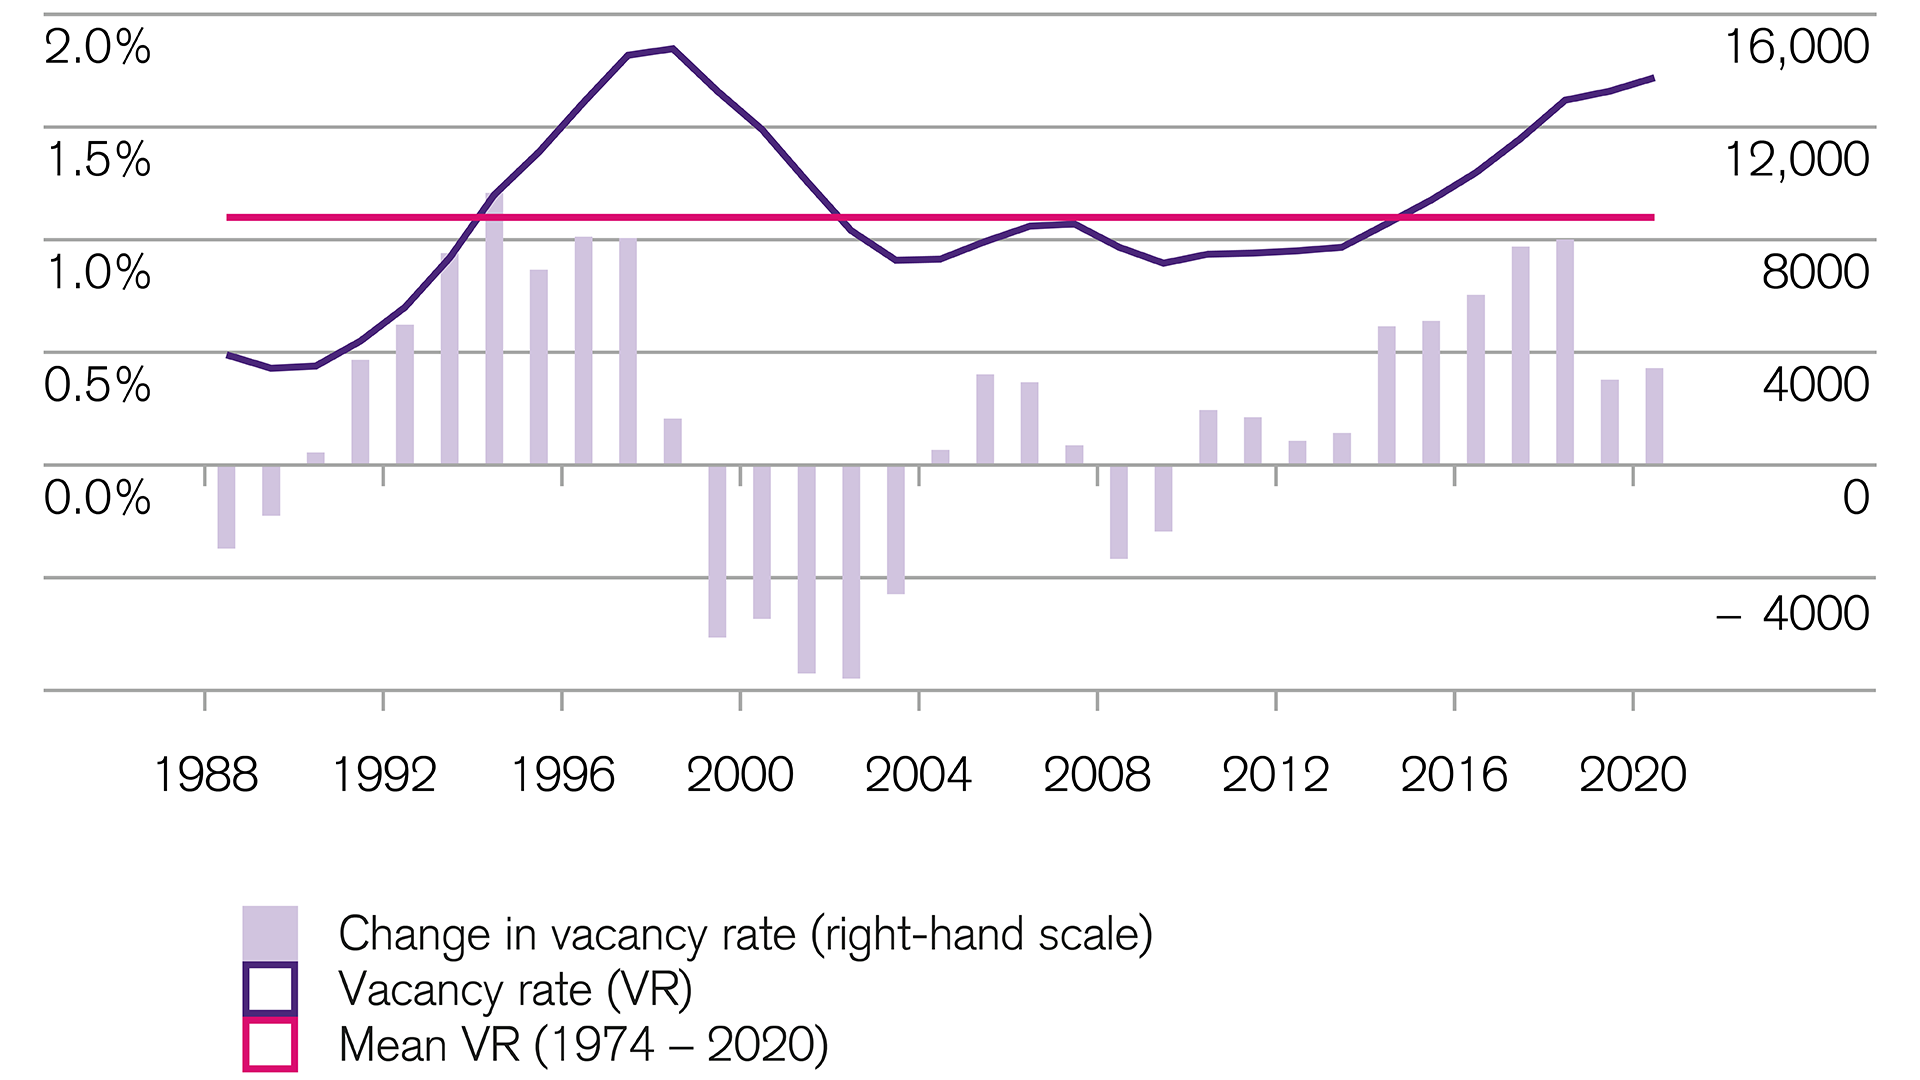 Financial markets: Swiss vacancy rate is the highest it's been in a long time